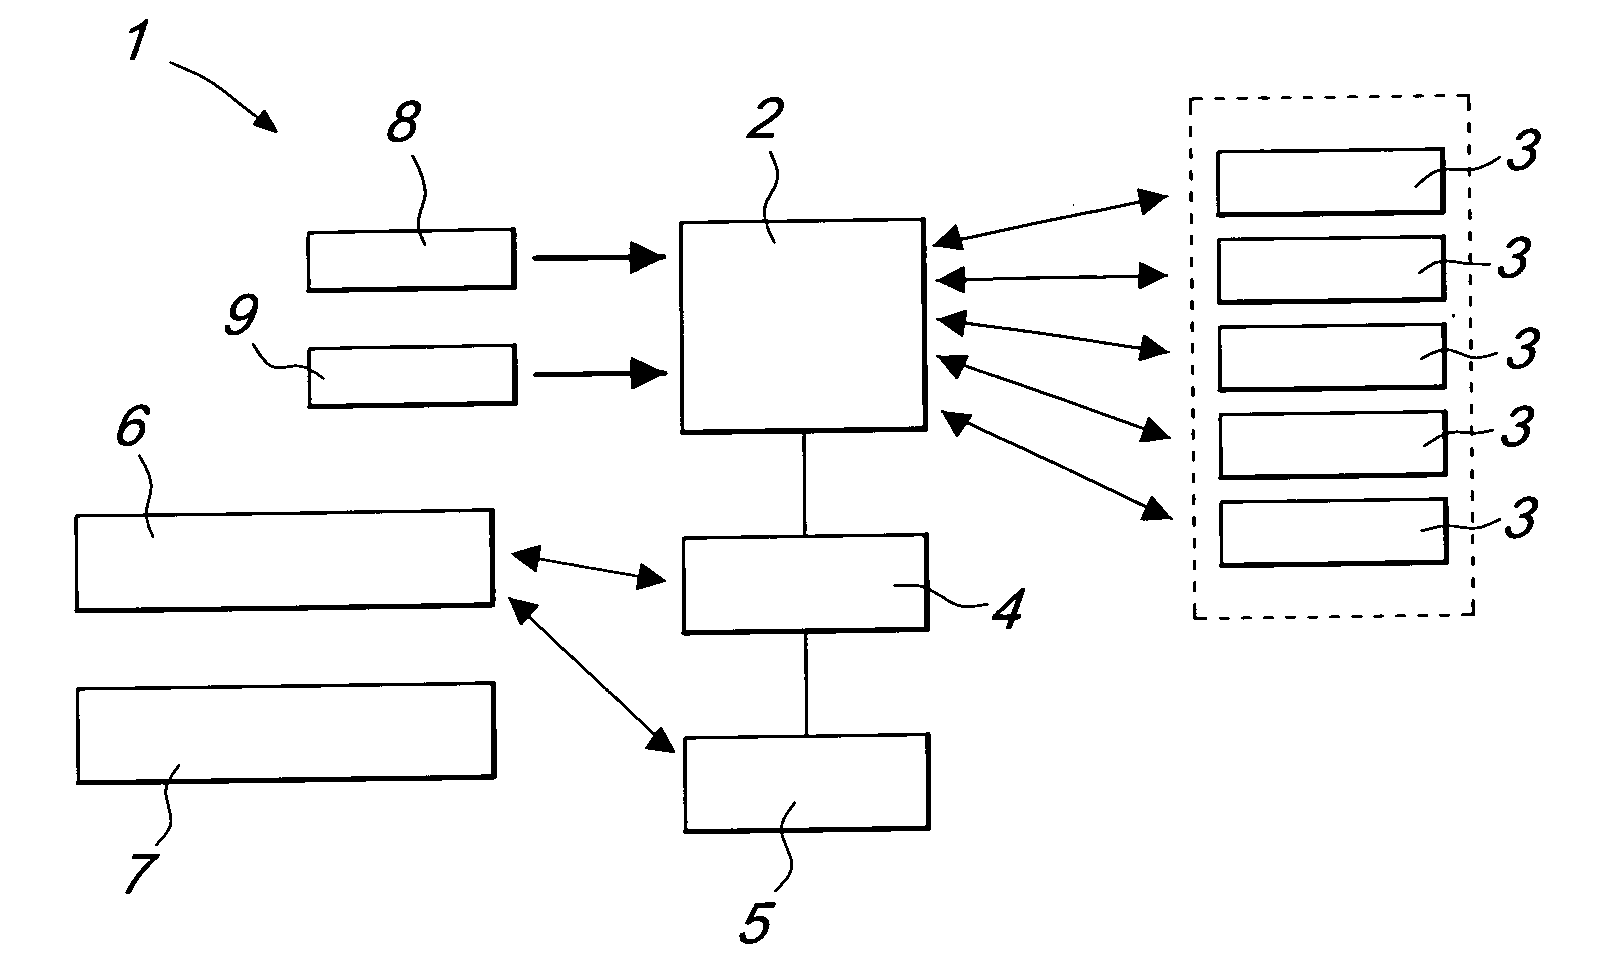 Method and system for comparing audio signals and identifying an audio source